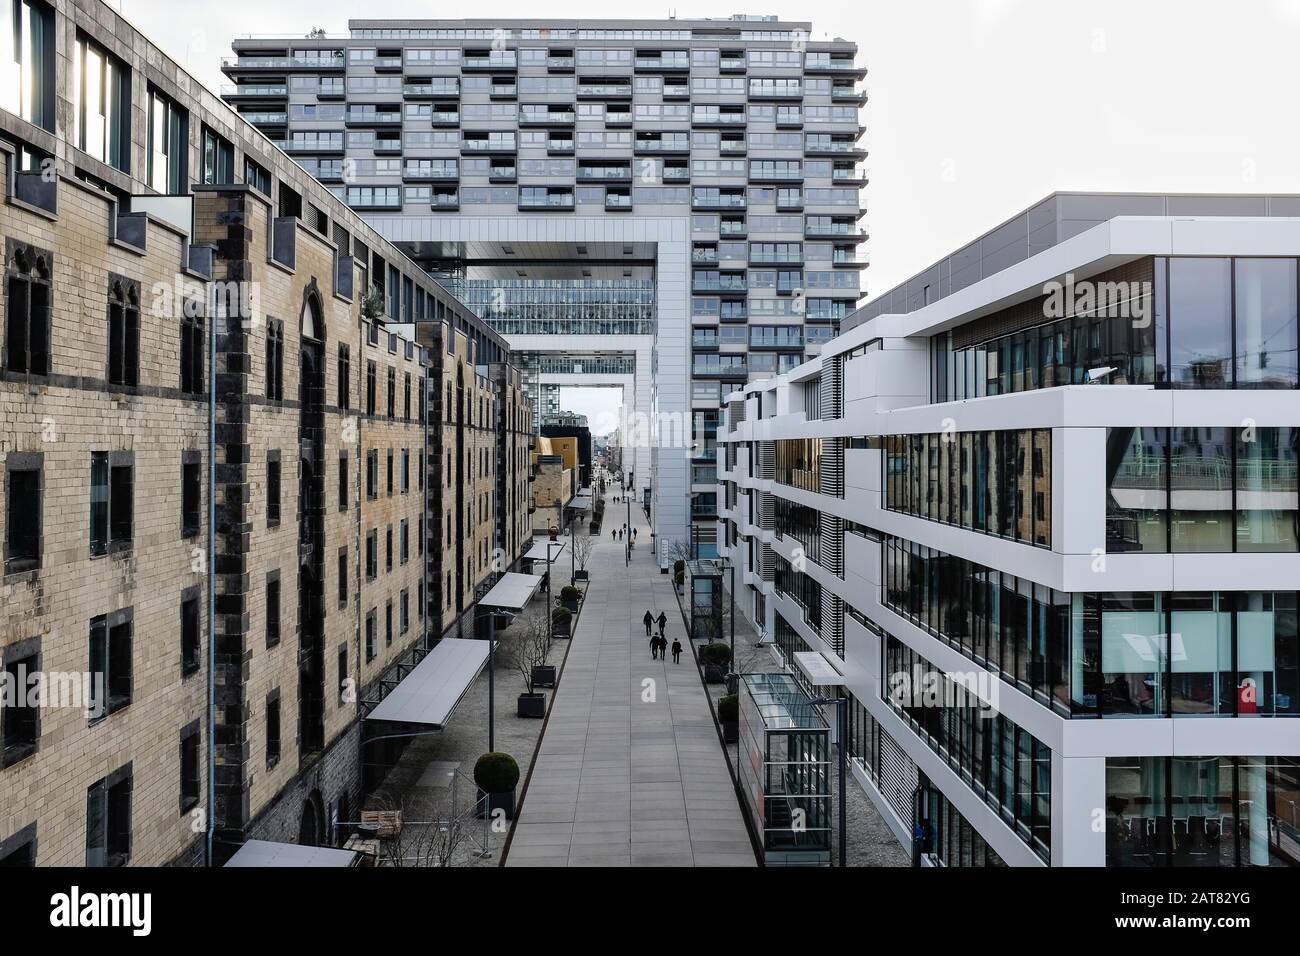 Street view of Crane buildings in Cologne Stock Photo